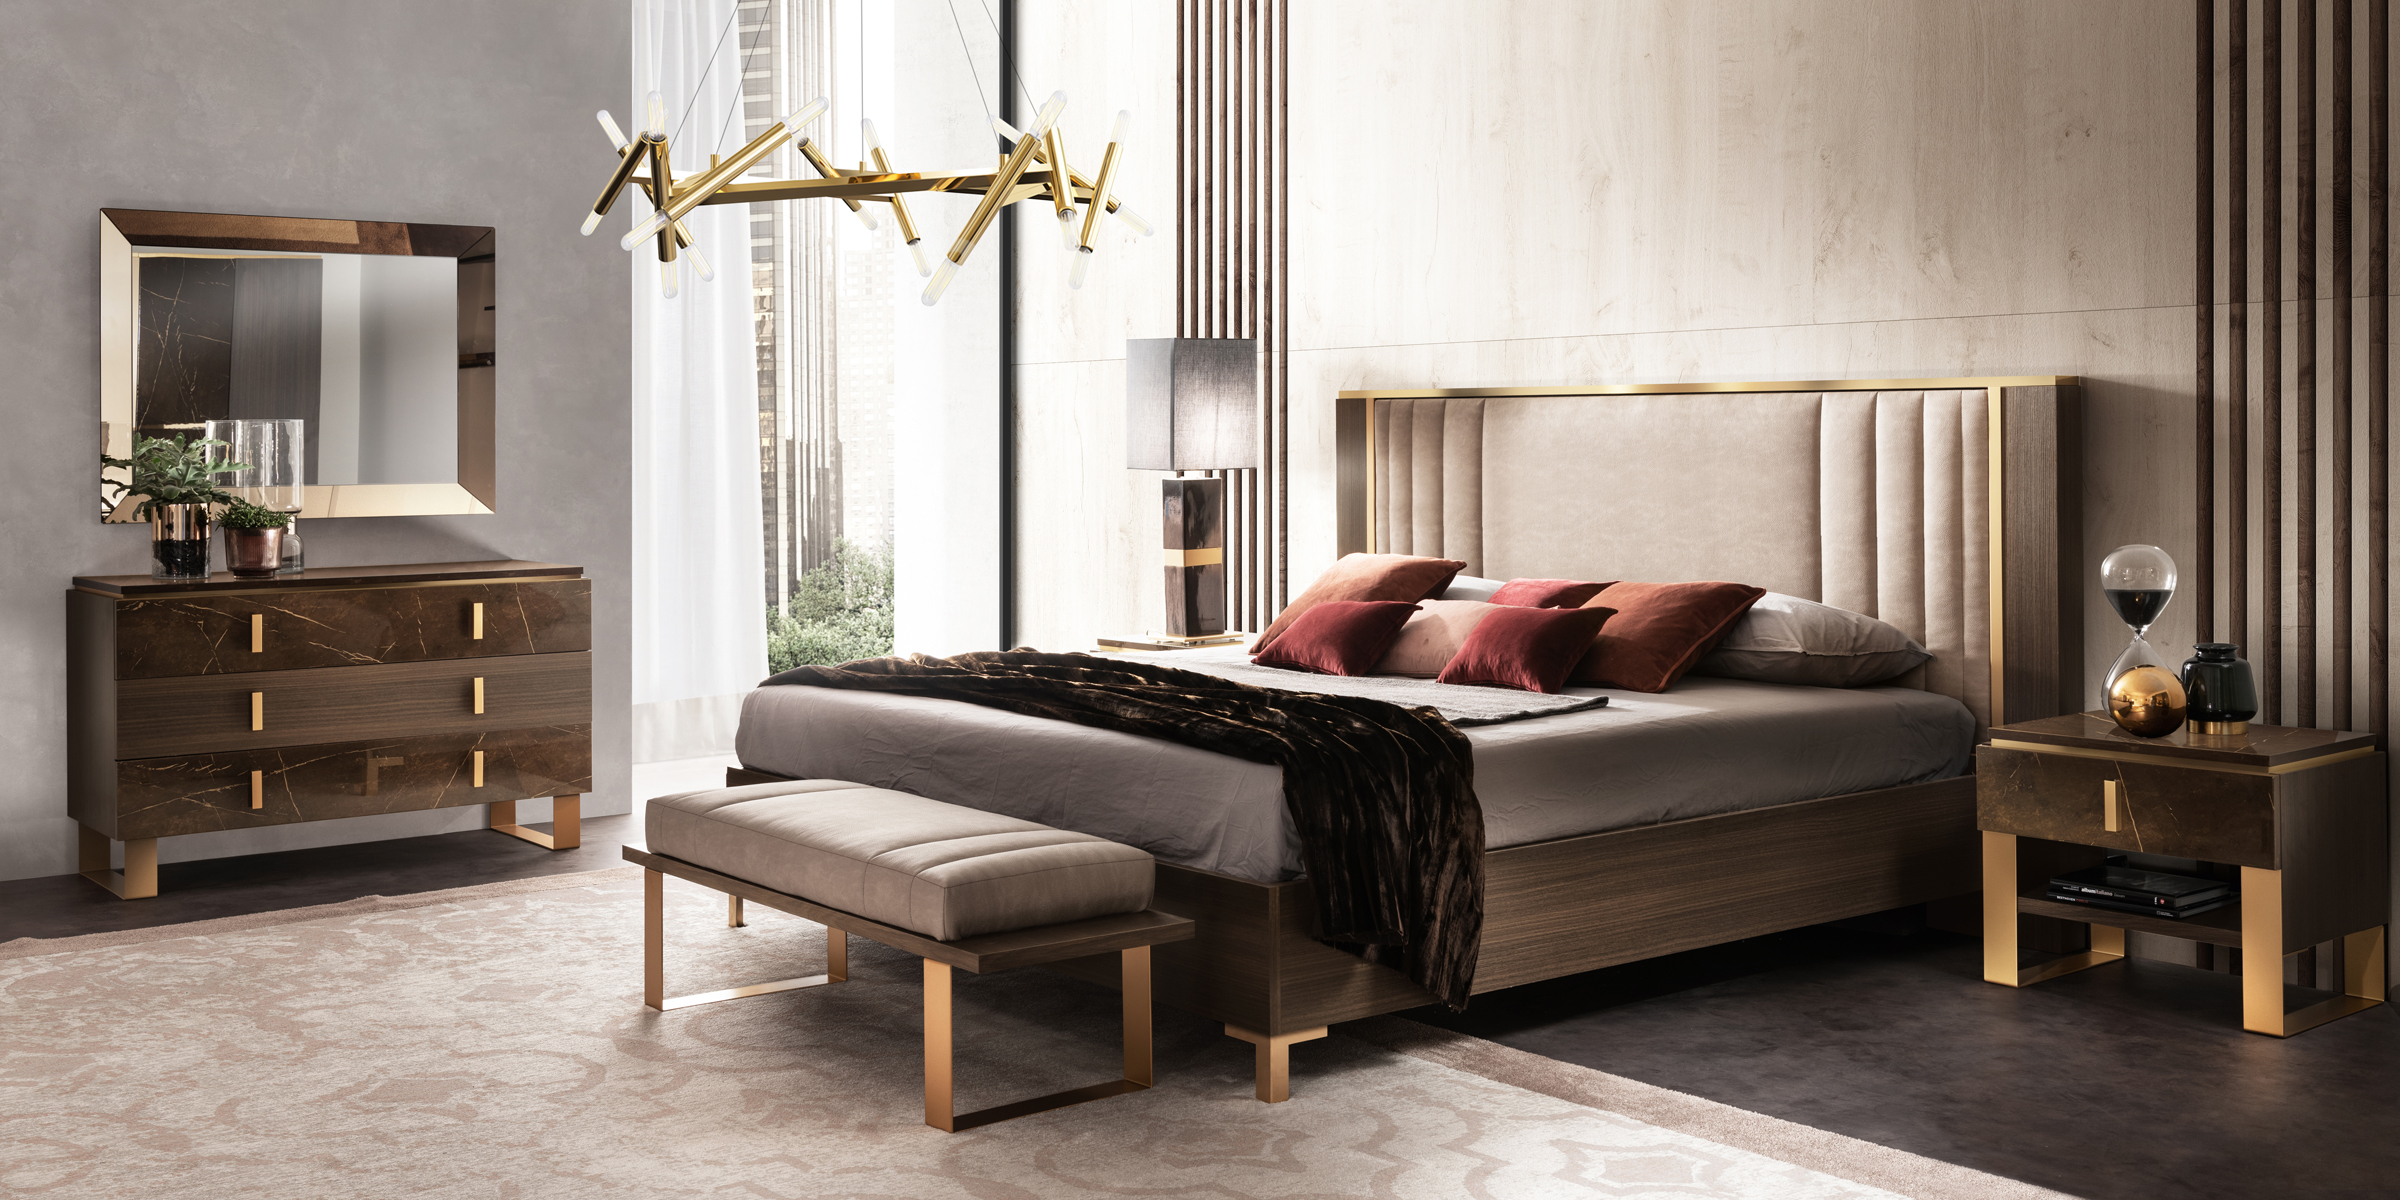 Bedroom Furniture Modern Bedrooms QS and KS Essenza Bedroom by Arredoclassic, Italy Additional